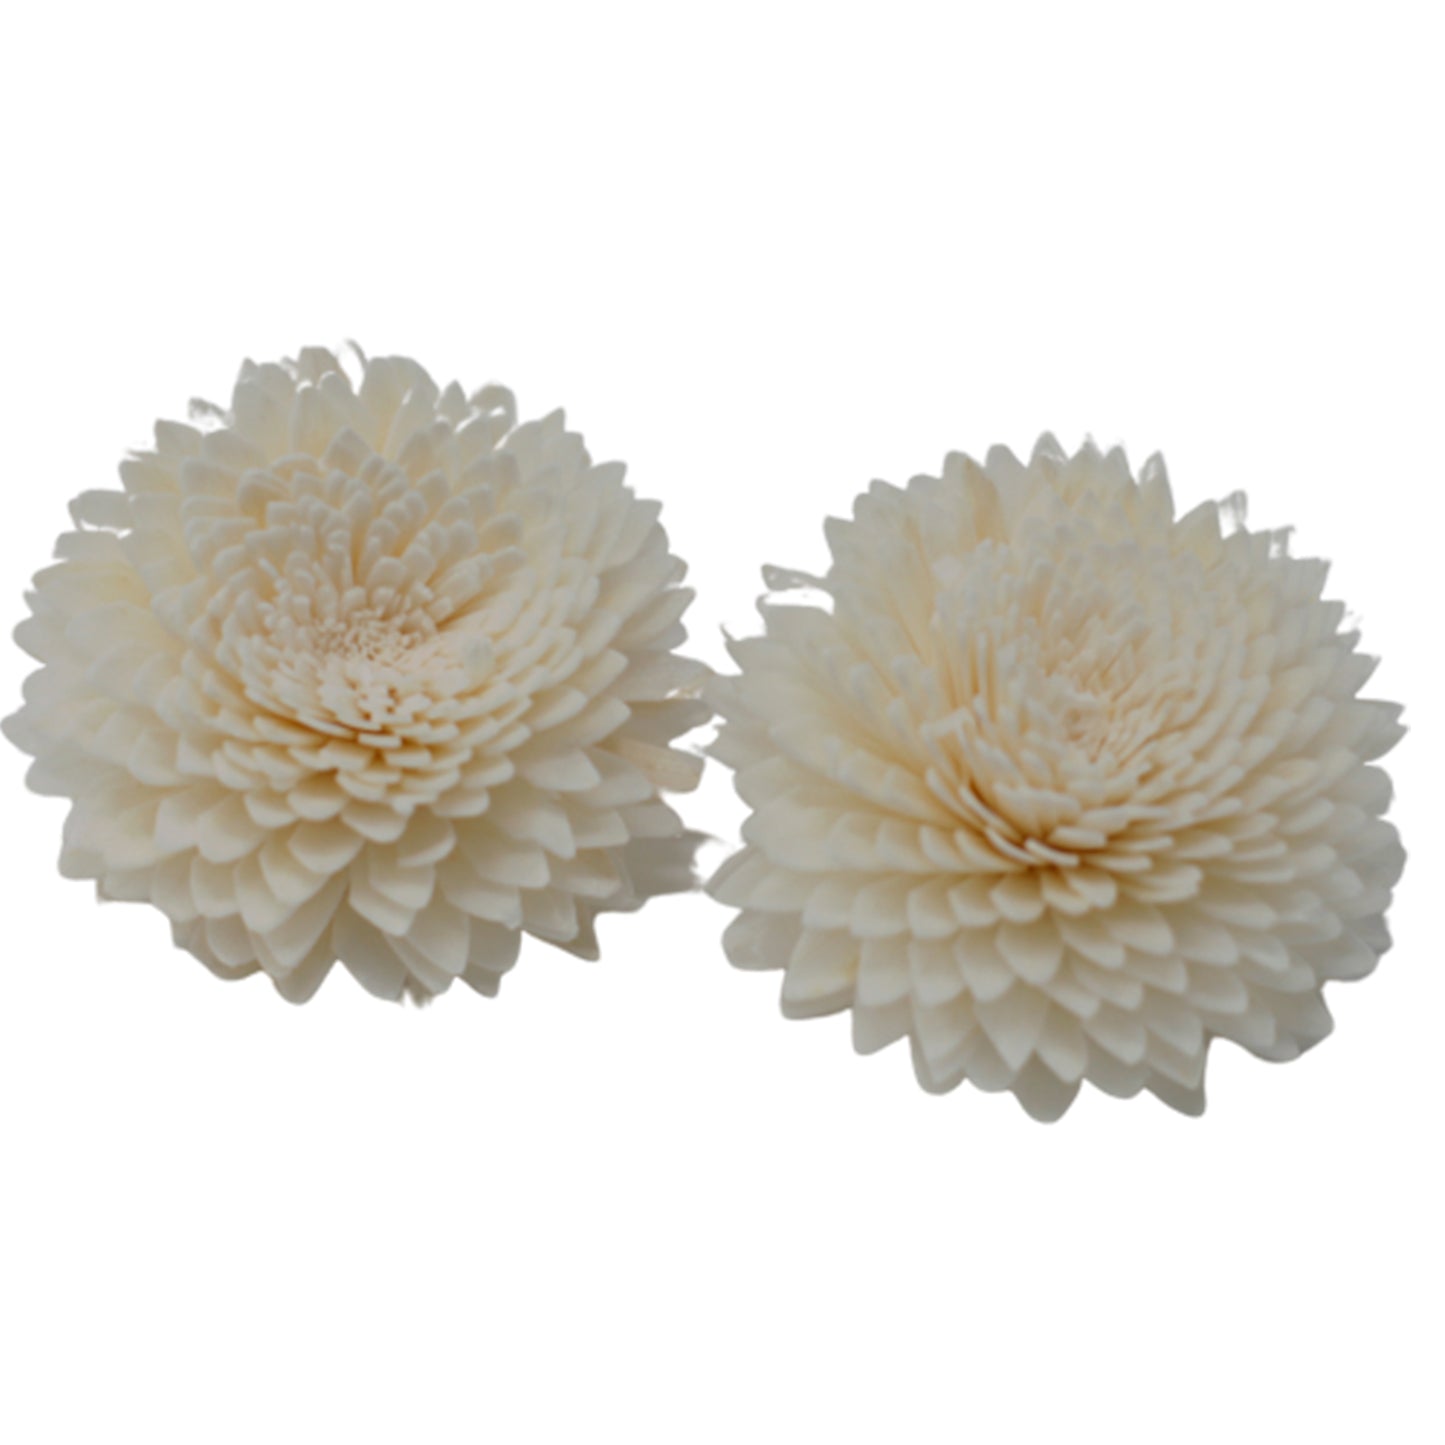 Natural Diffuser Flowers - Lrg Carnation on String